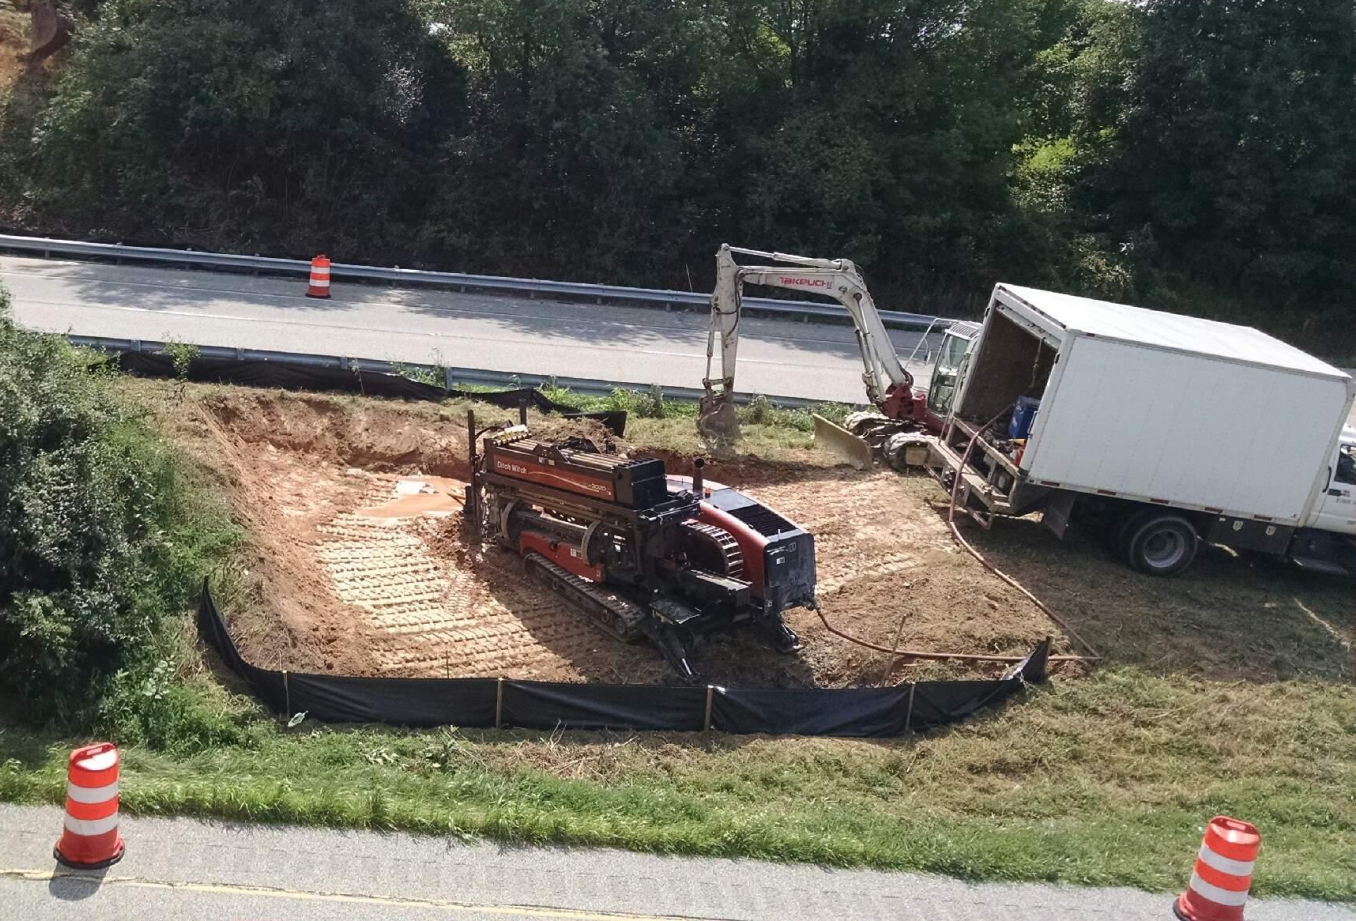 A white truck is parked on the side of the road next to a construction site